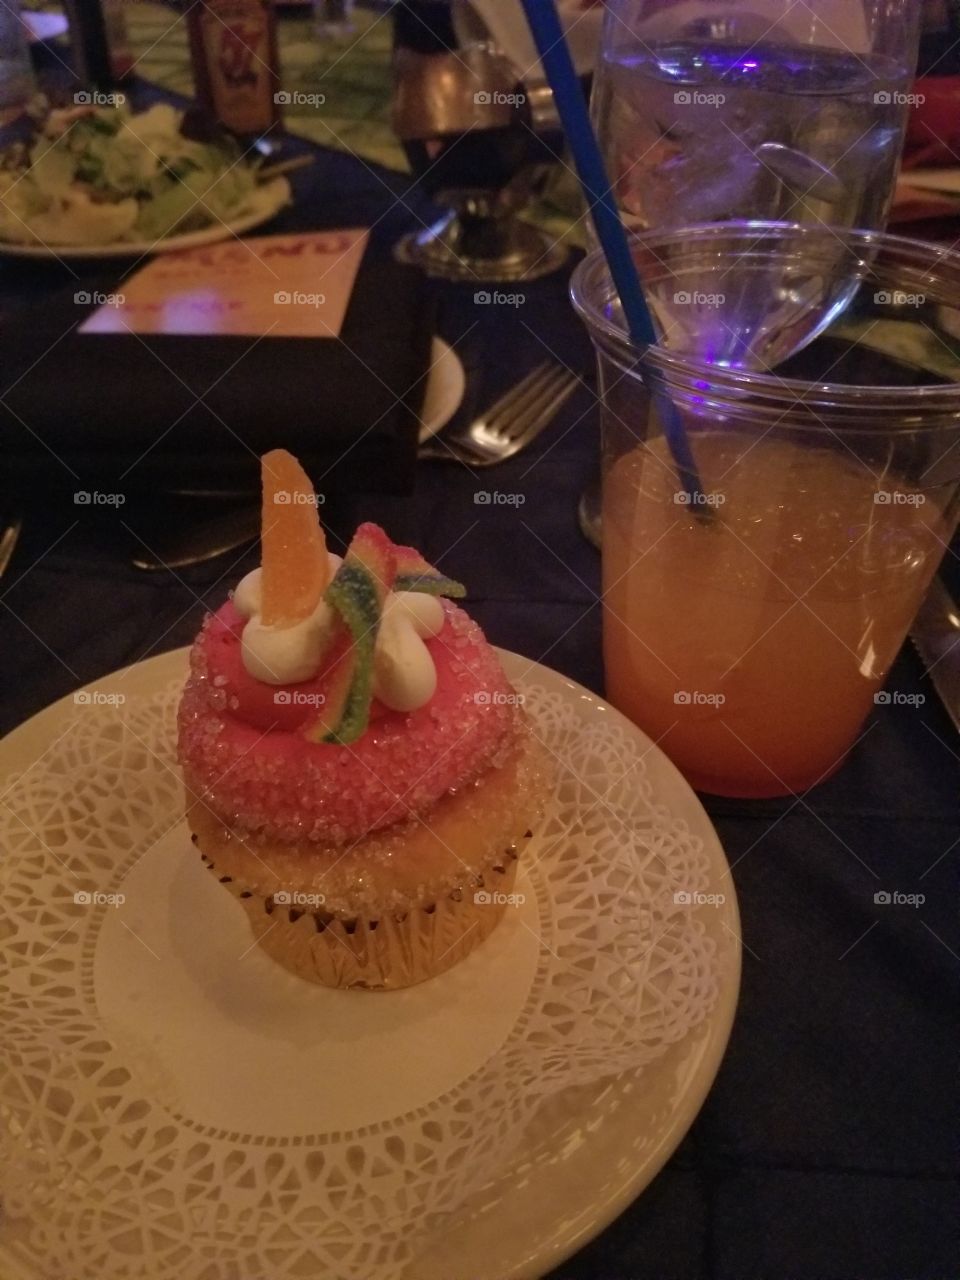 sweet treats at the Willy Wonka dinner.  there may just be a special golden ticket in your sweets take a bite and let's see!